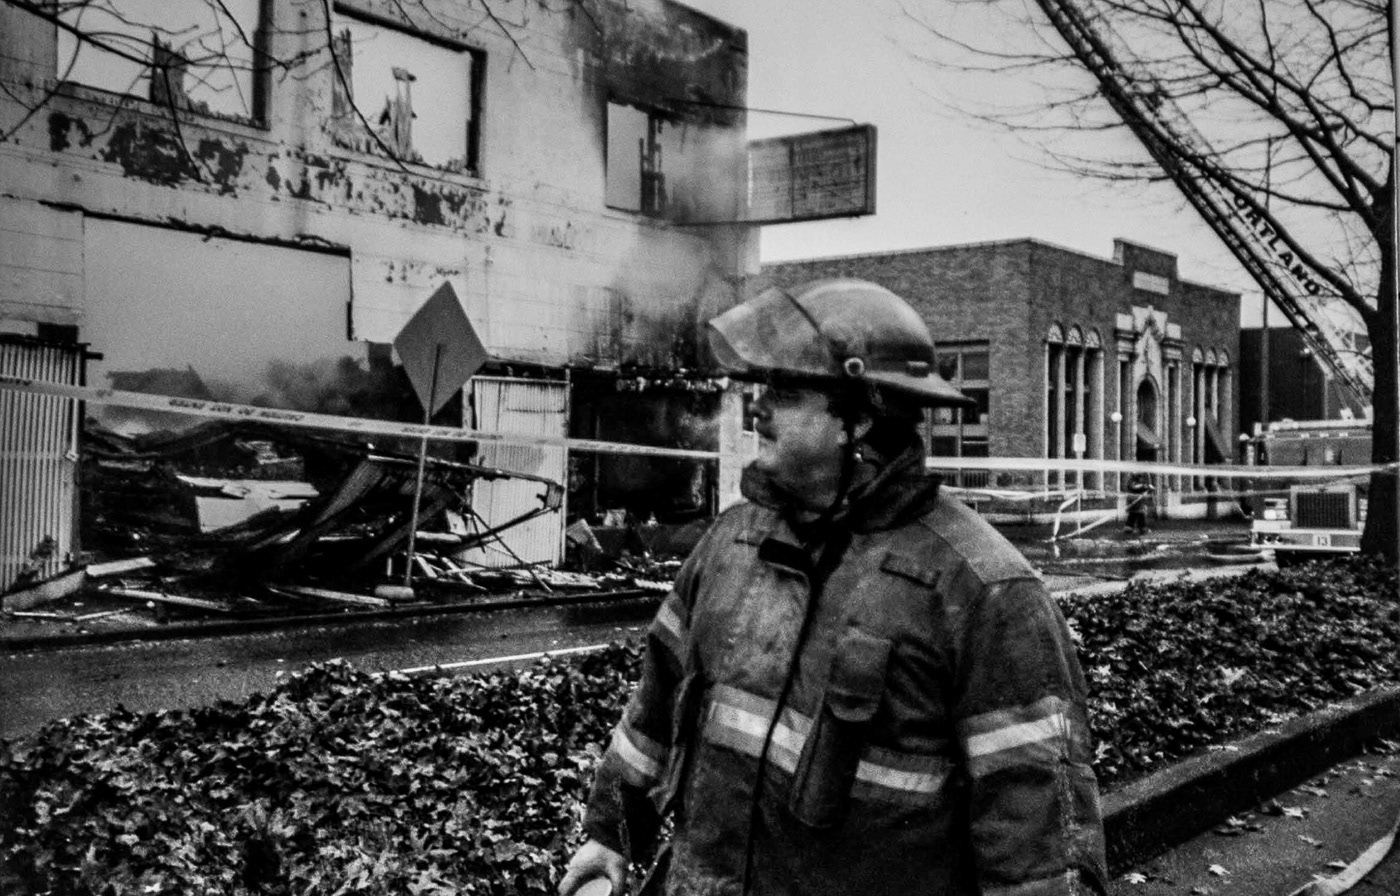 firefighter looks on at a fires aftermath